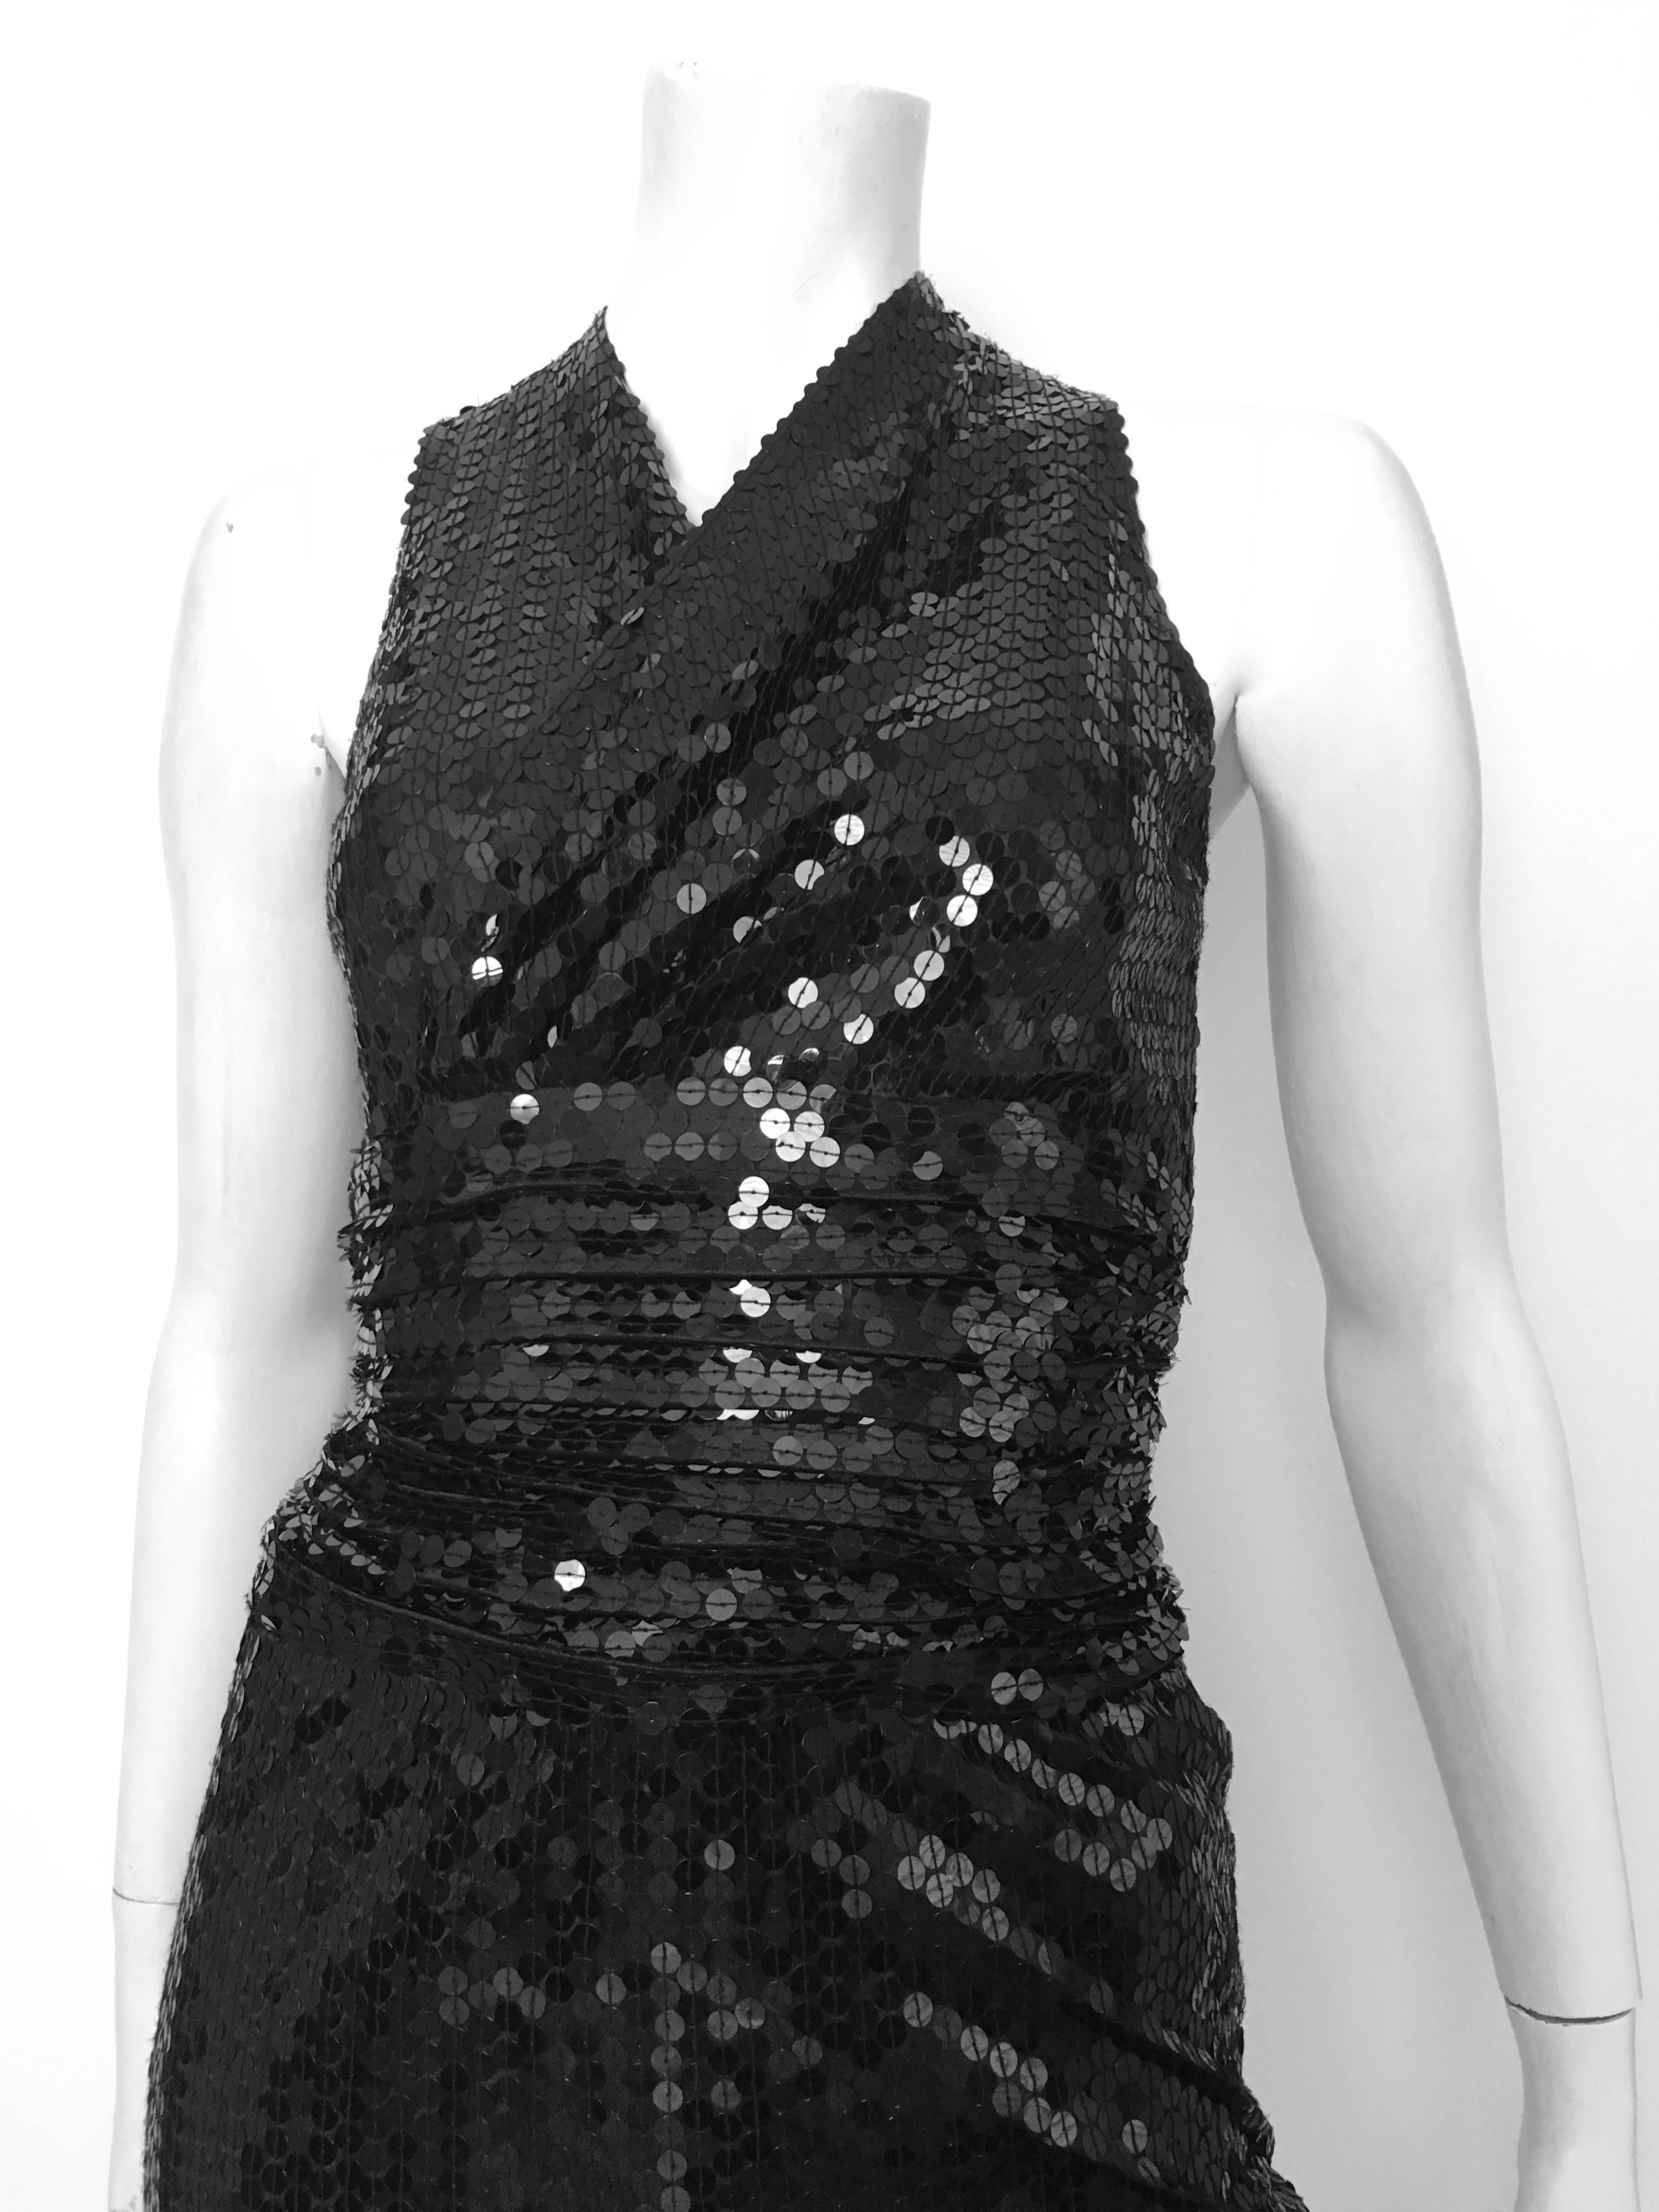 Oleg Cassini 1980s black sequin cocktail evening dress is a vintage size 6 but fits like a modern USA size 4.  Ladies please grab your best friend, Mr. Tape Measure, and measure your bust, waist & hips to make certain this lovely vintage